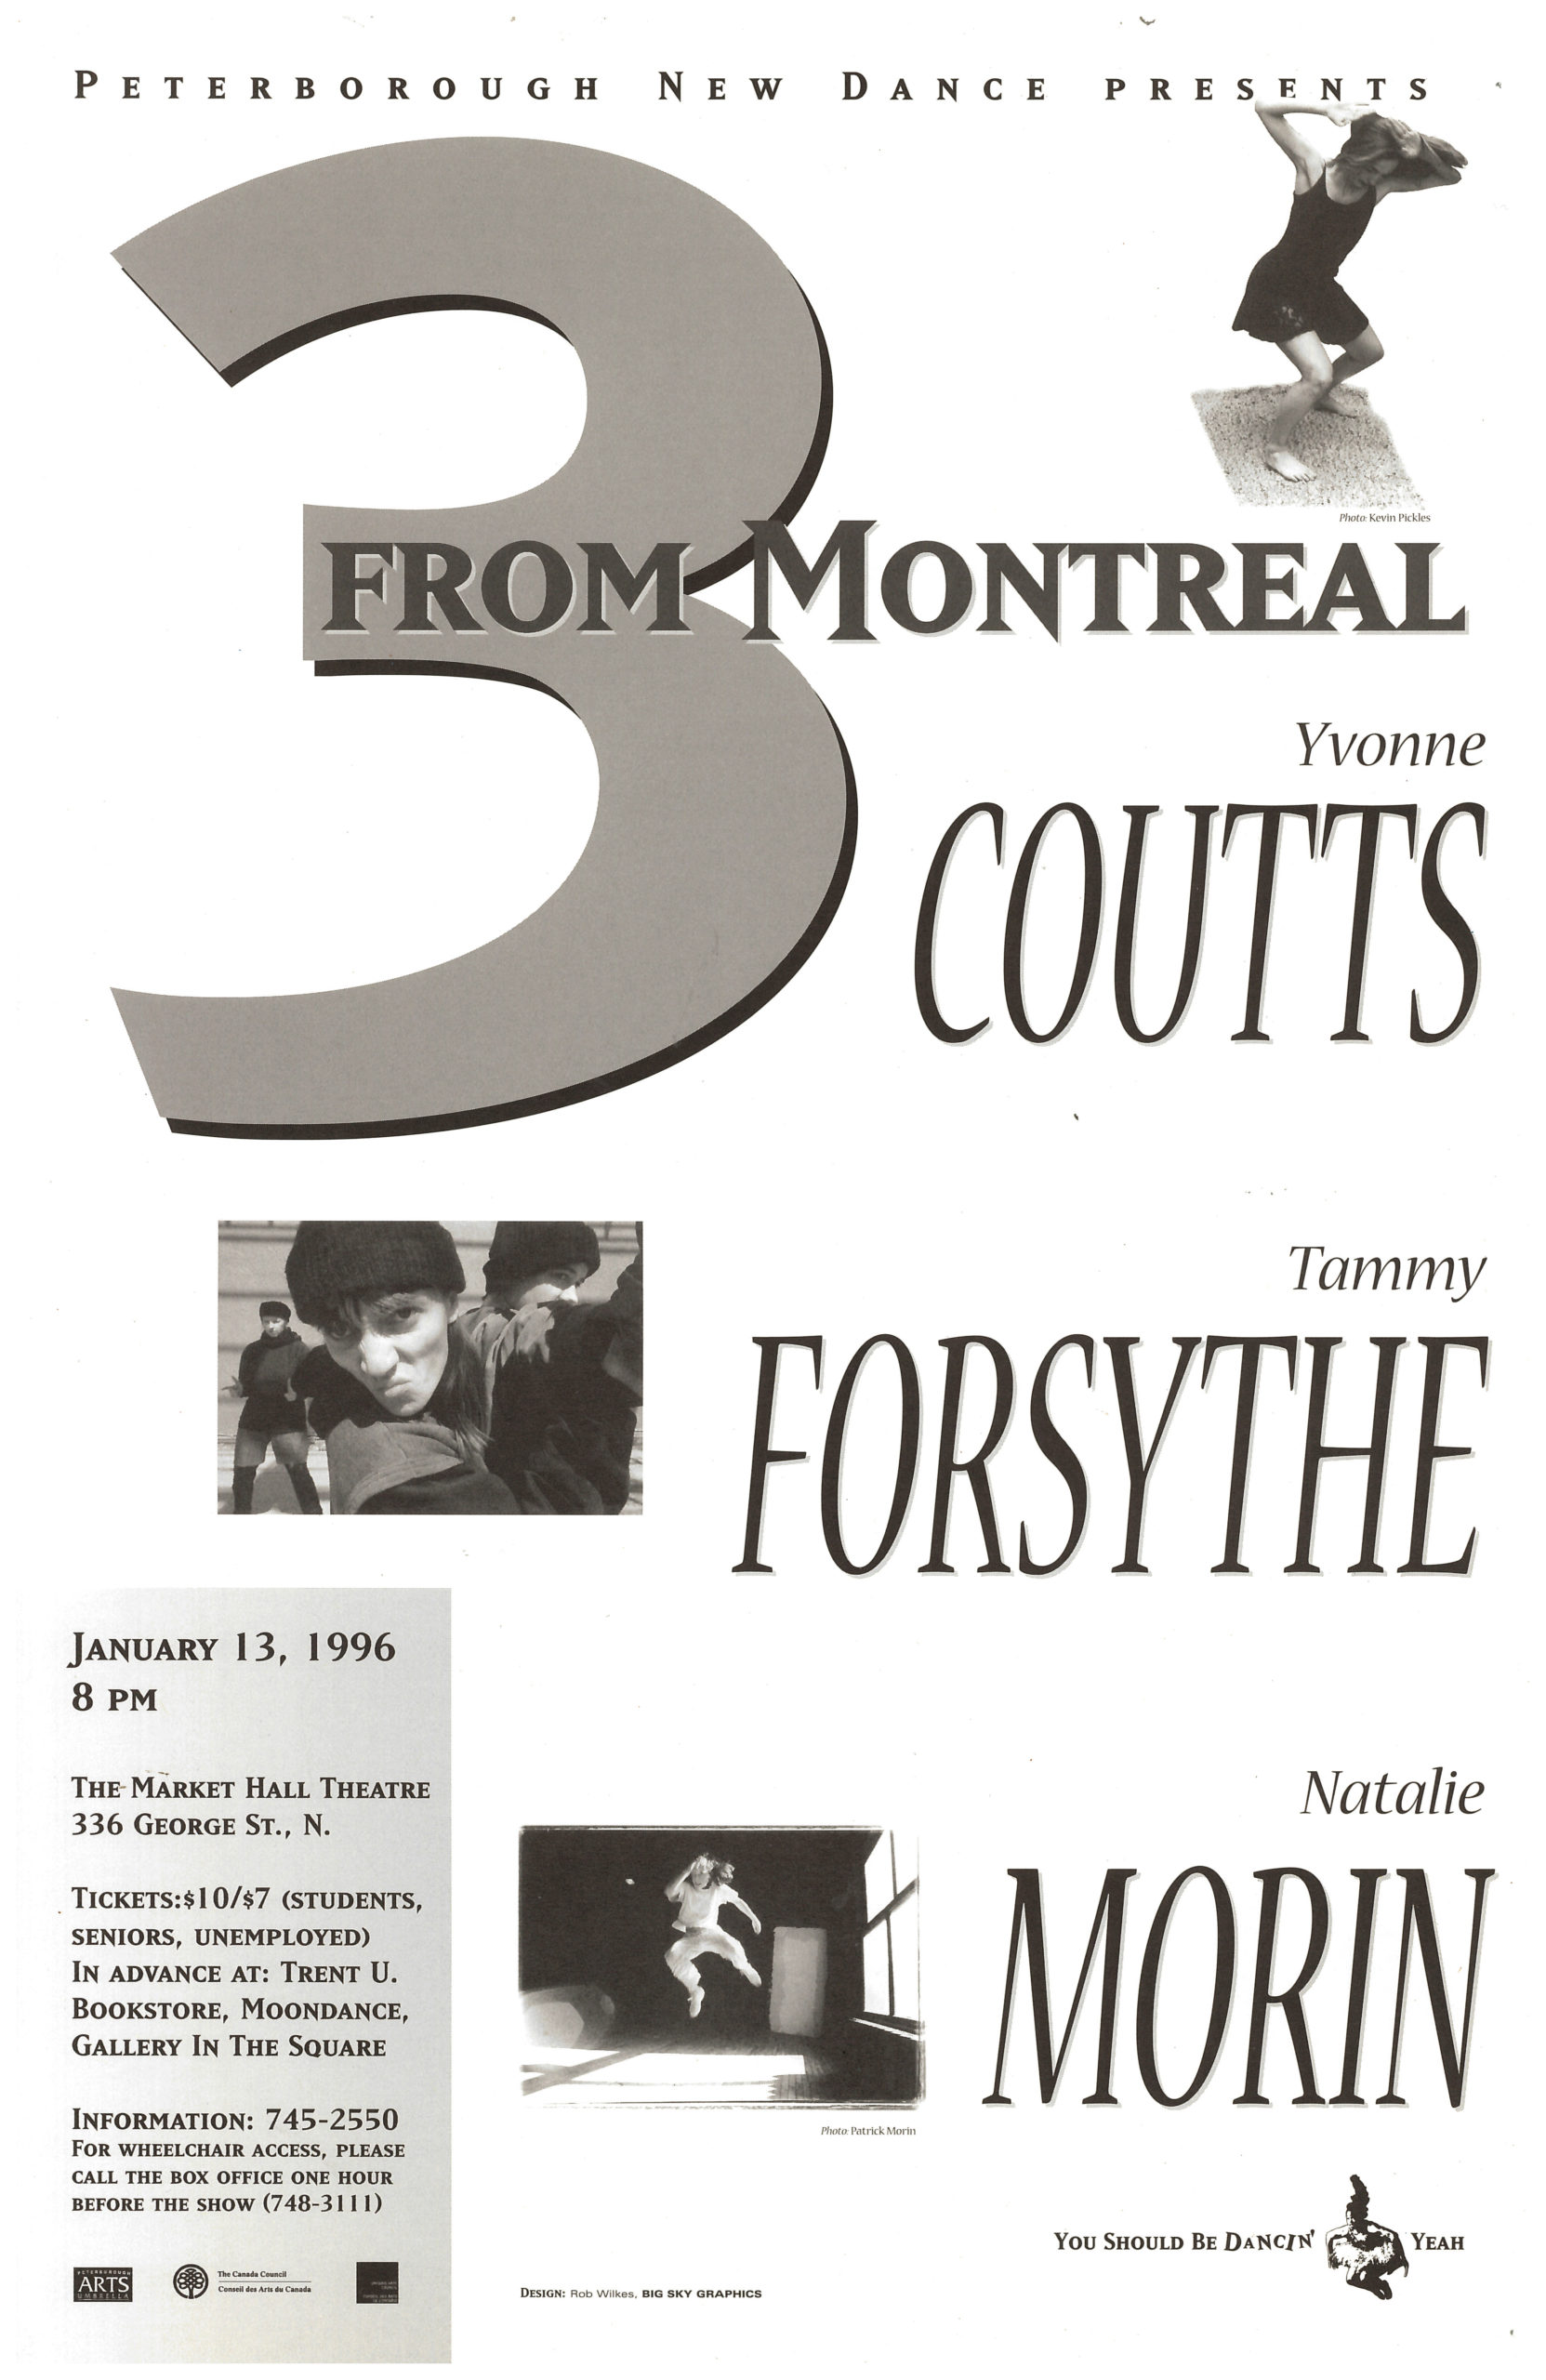 3 From Montreal Poster for 3 From Montreal in the photo.